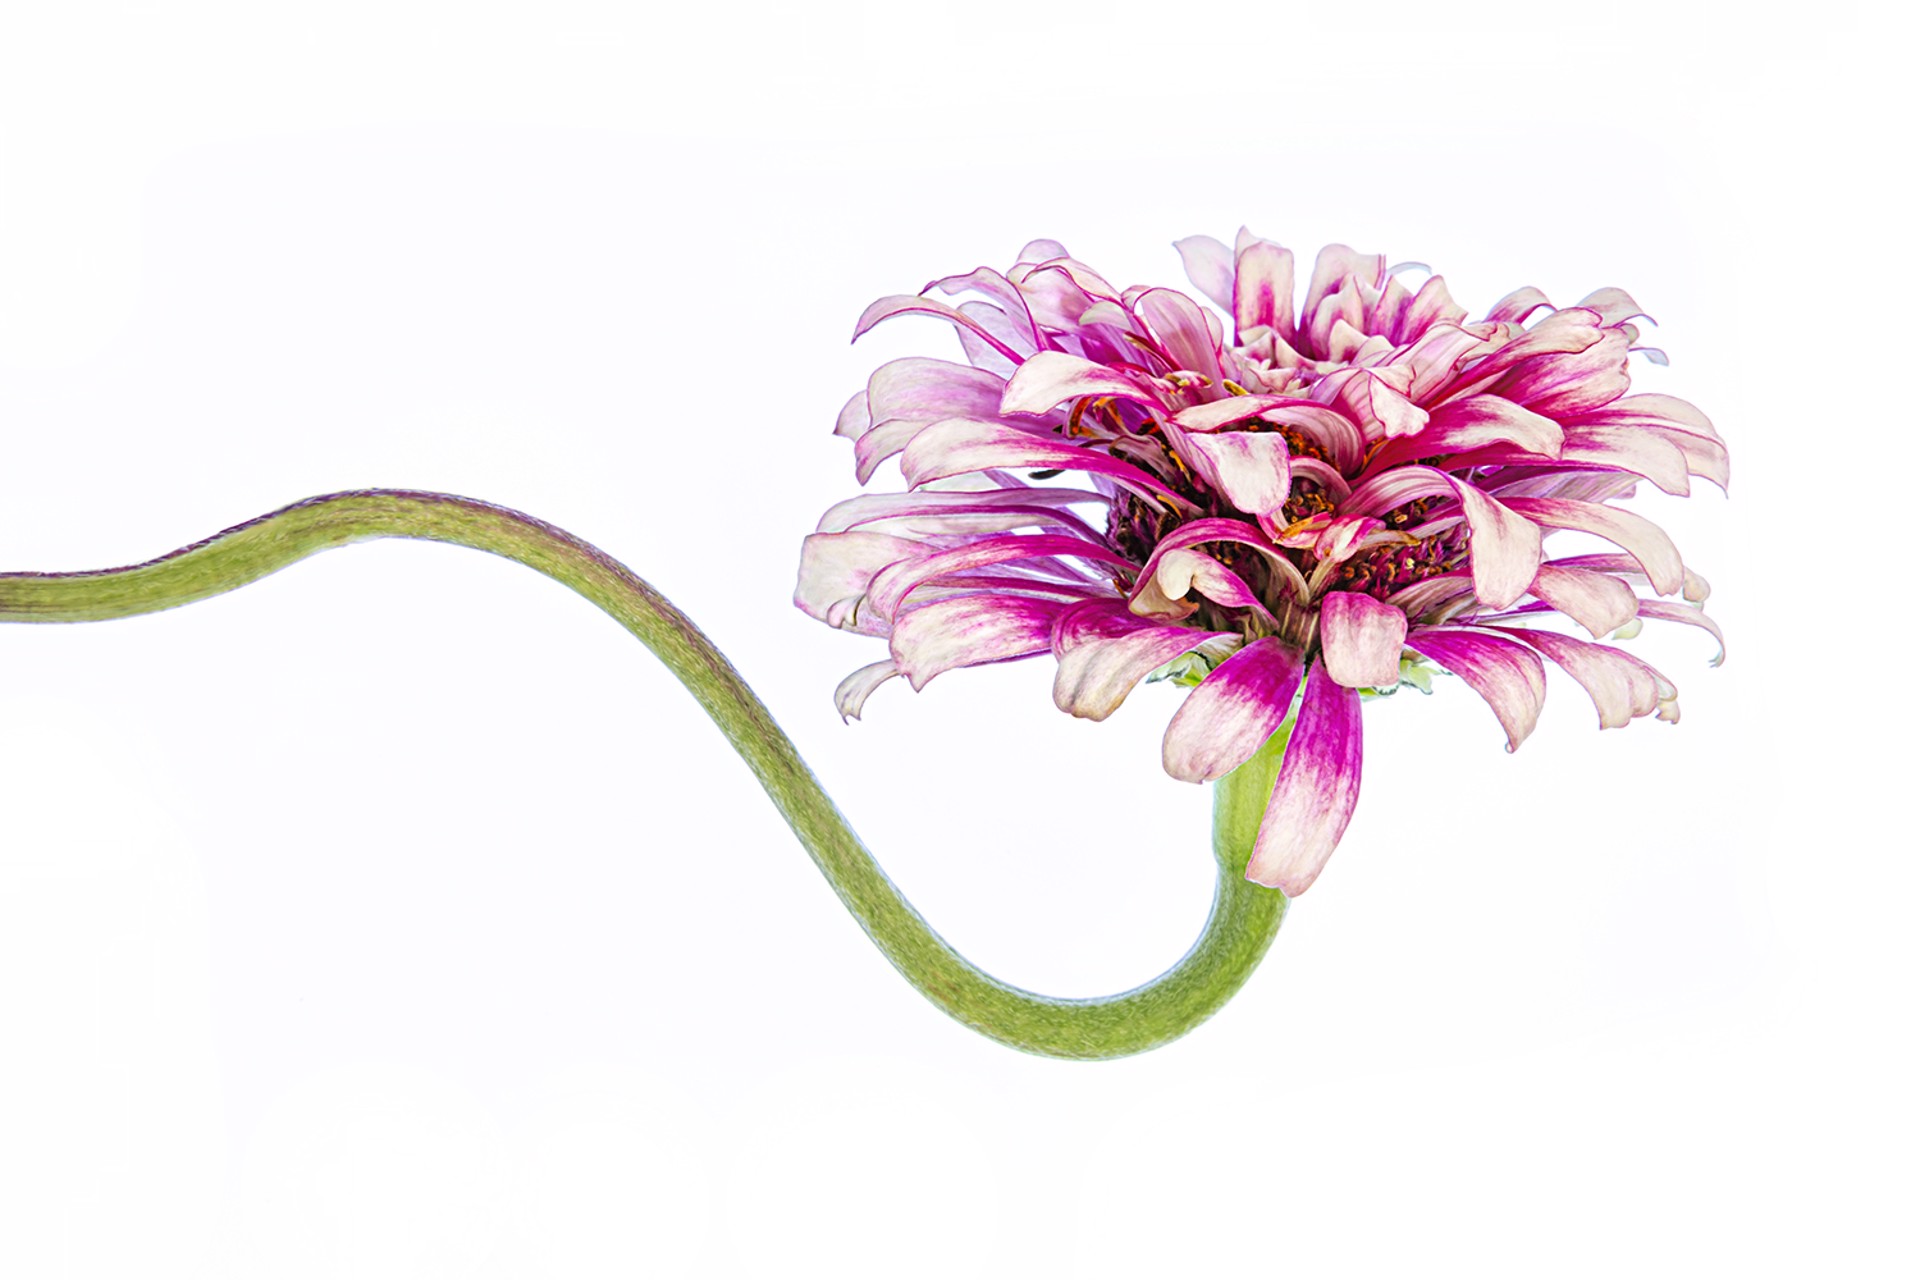 Mione (Pink Zinnia) by Cathy Manning